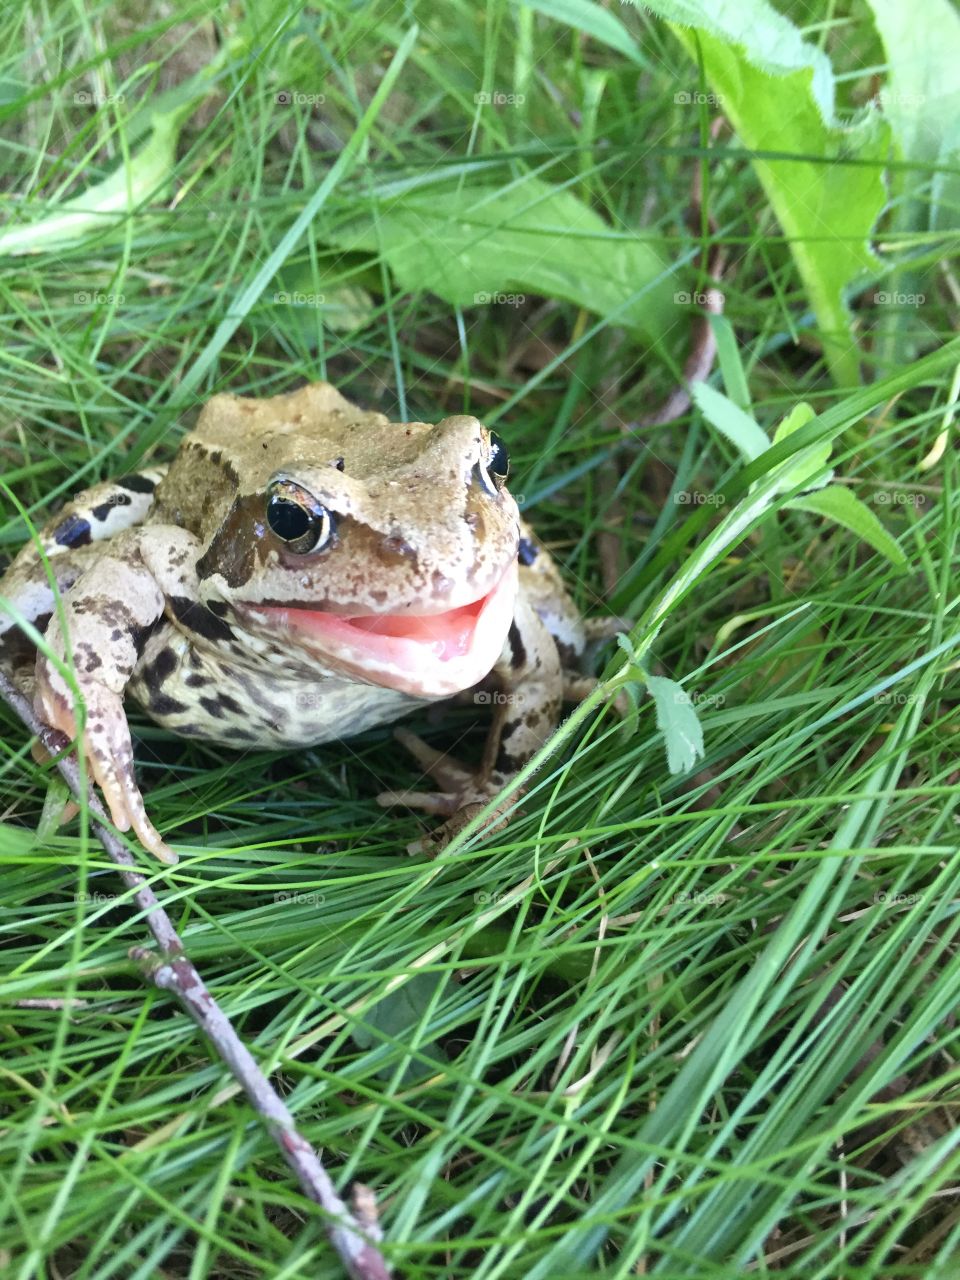 Croaking frog on the grass